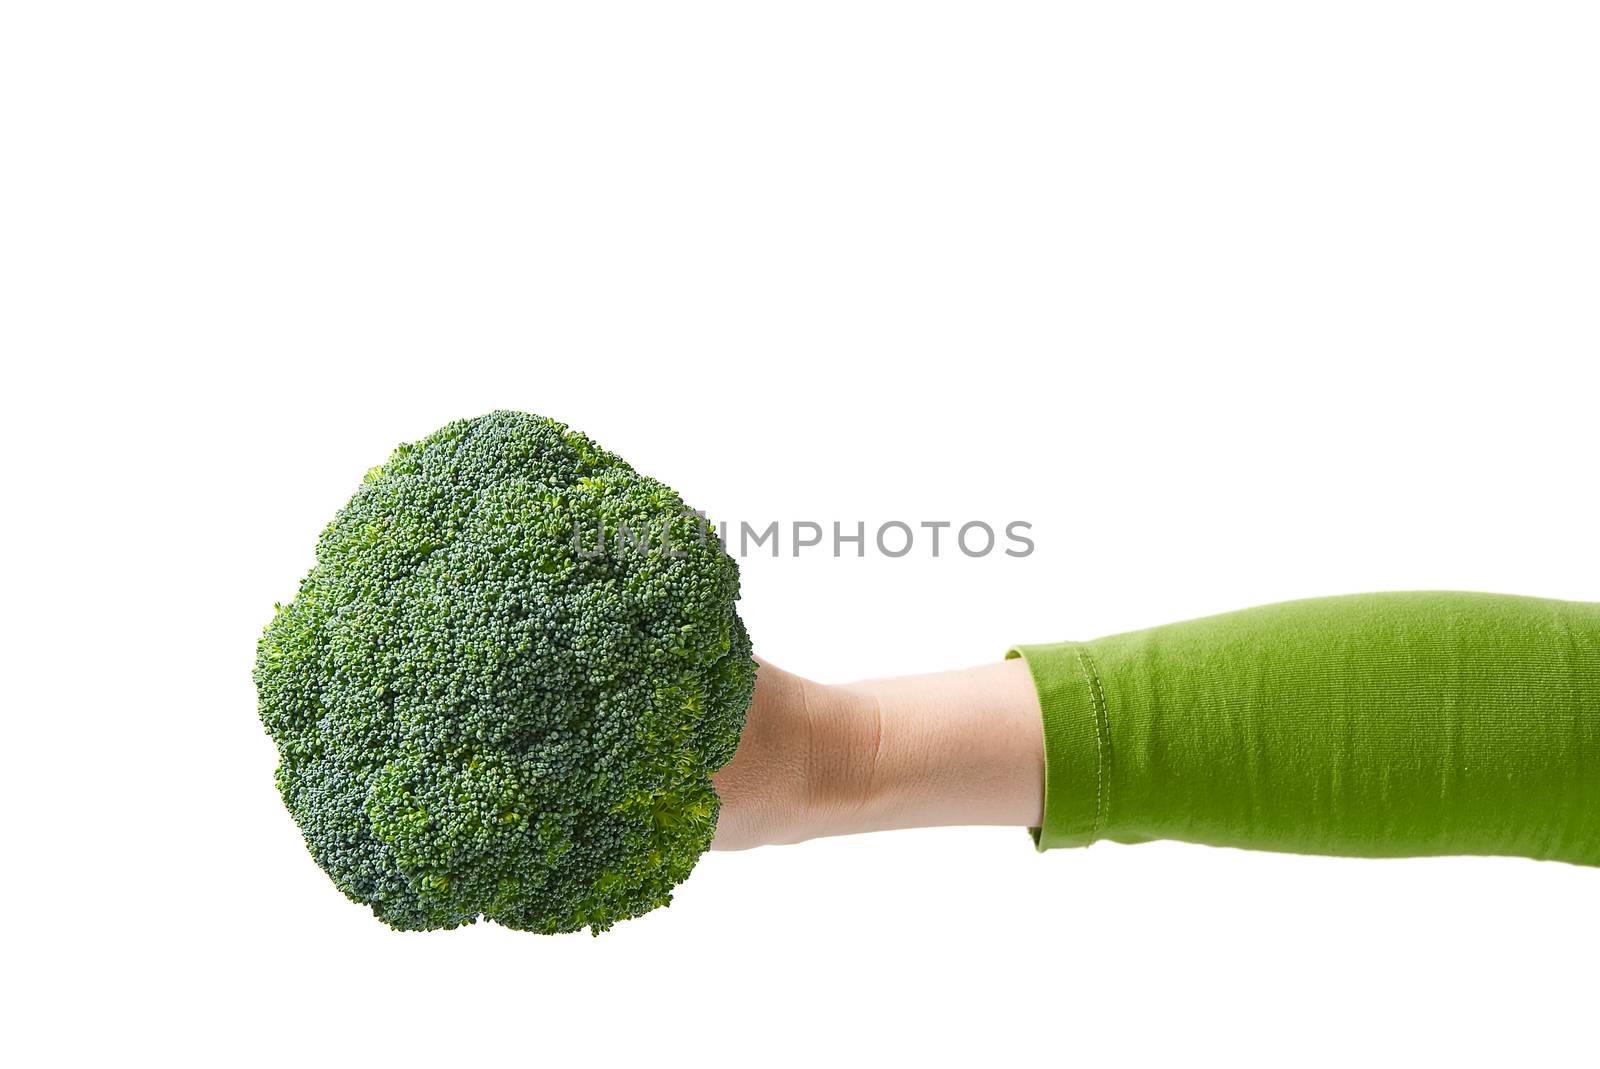 Fresh Organic Green Broccoli in Woman's Hand, Concept Healthy Food. Female Hand Holding Broccoli Isolated on White Background. by PhotoTime